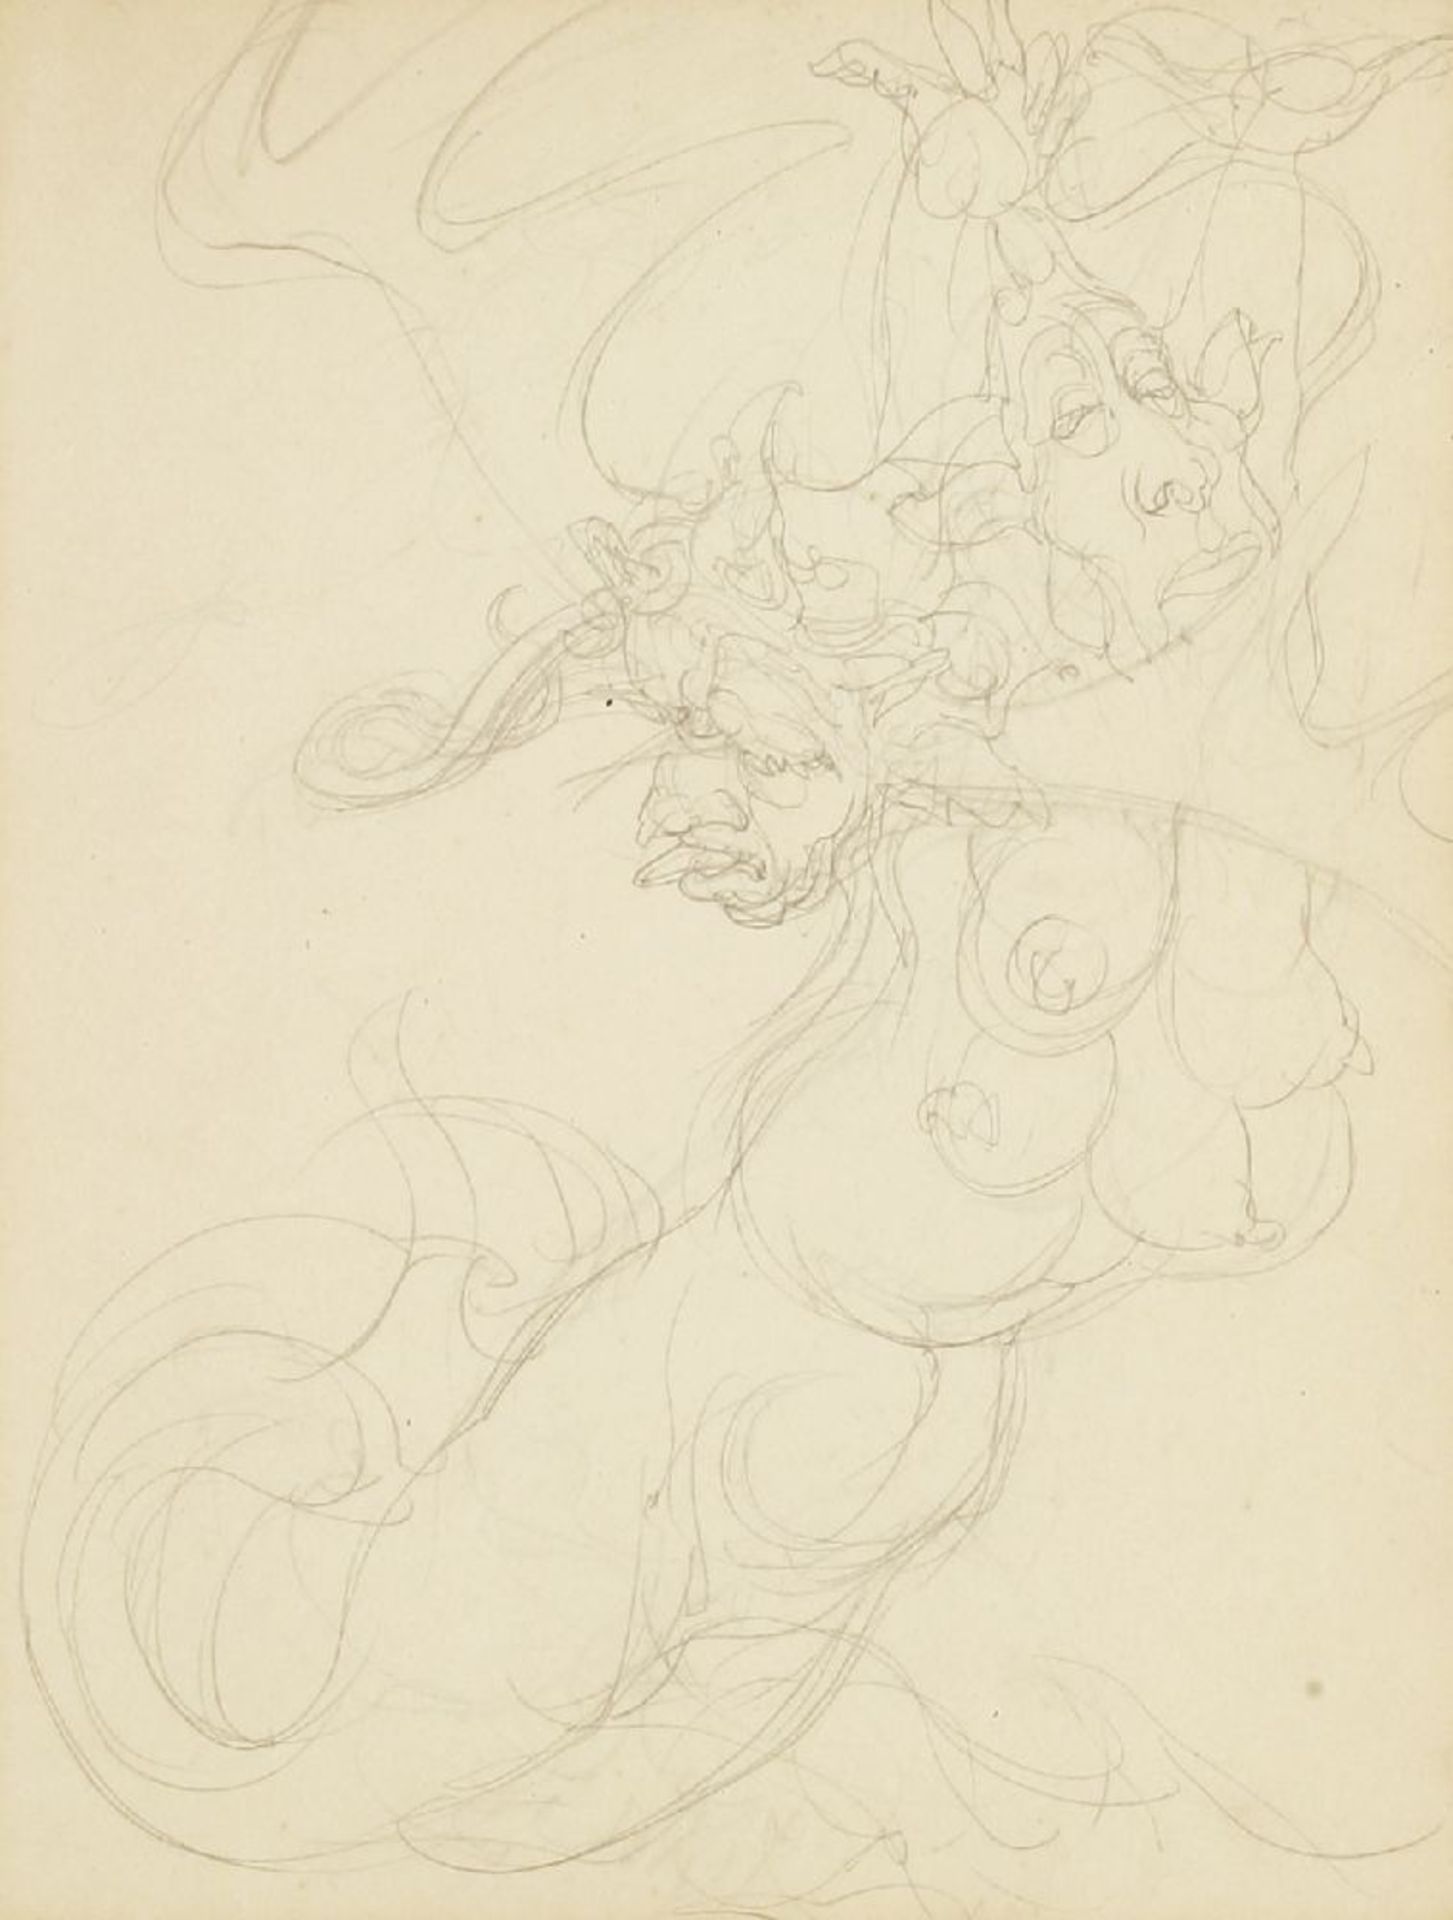 *Austin Osman Spare (1886-1956)'AUTOMATIC DRAWING', from a sketchbook, 1927Pencil25 x 19cm*Artist'